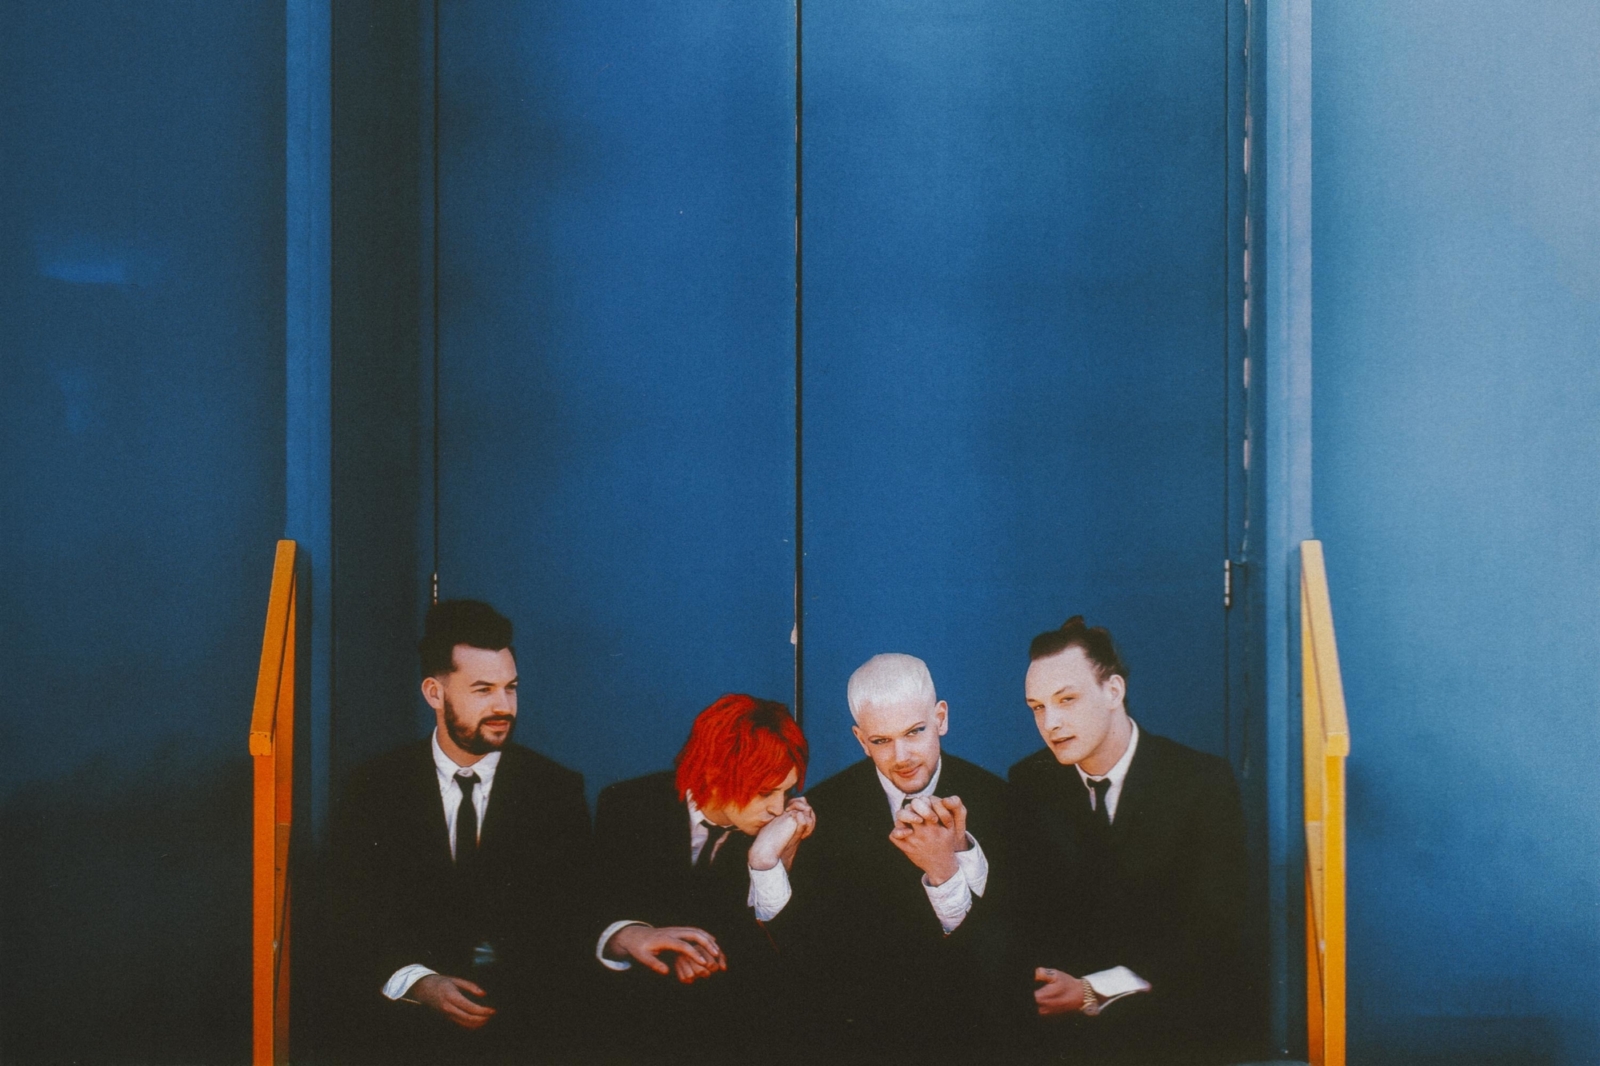 Tracks: The 1975, FIDLAR, Christine and the Queens & more